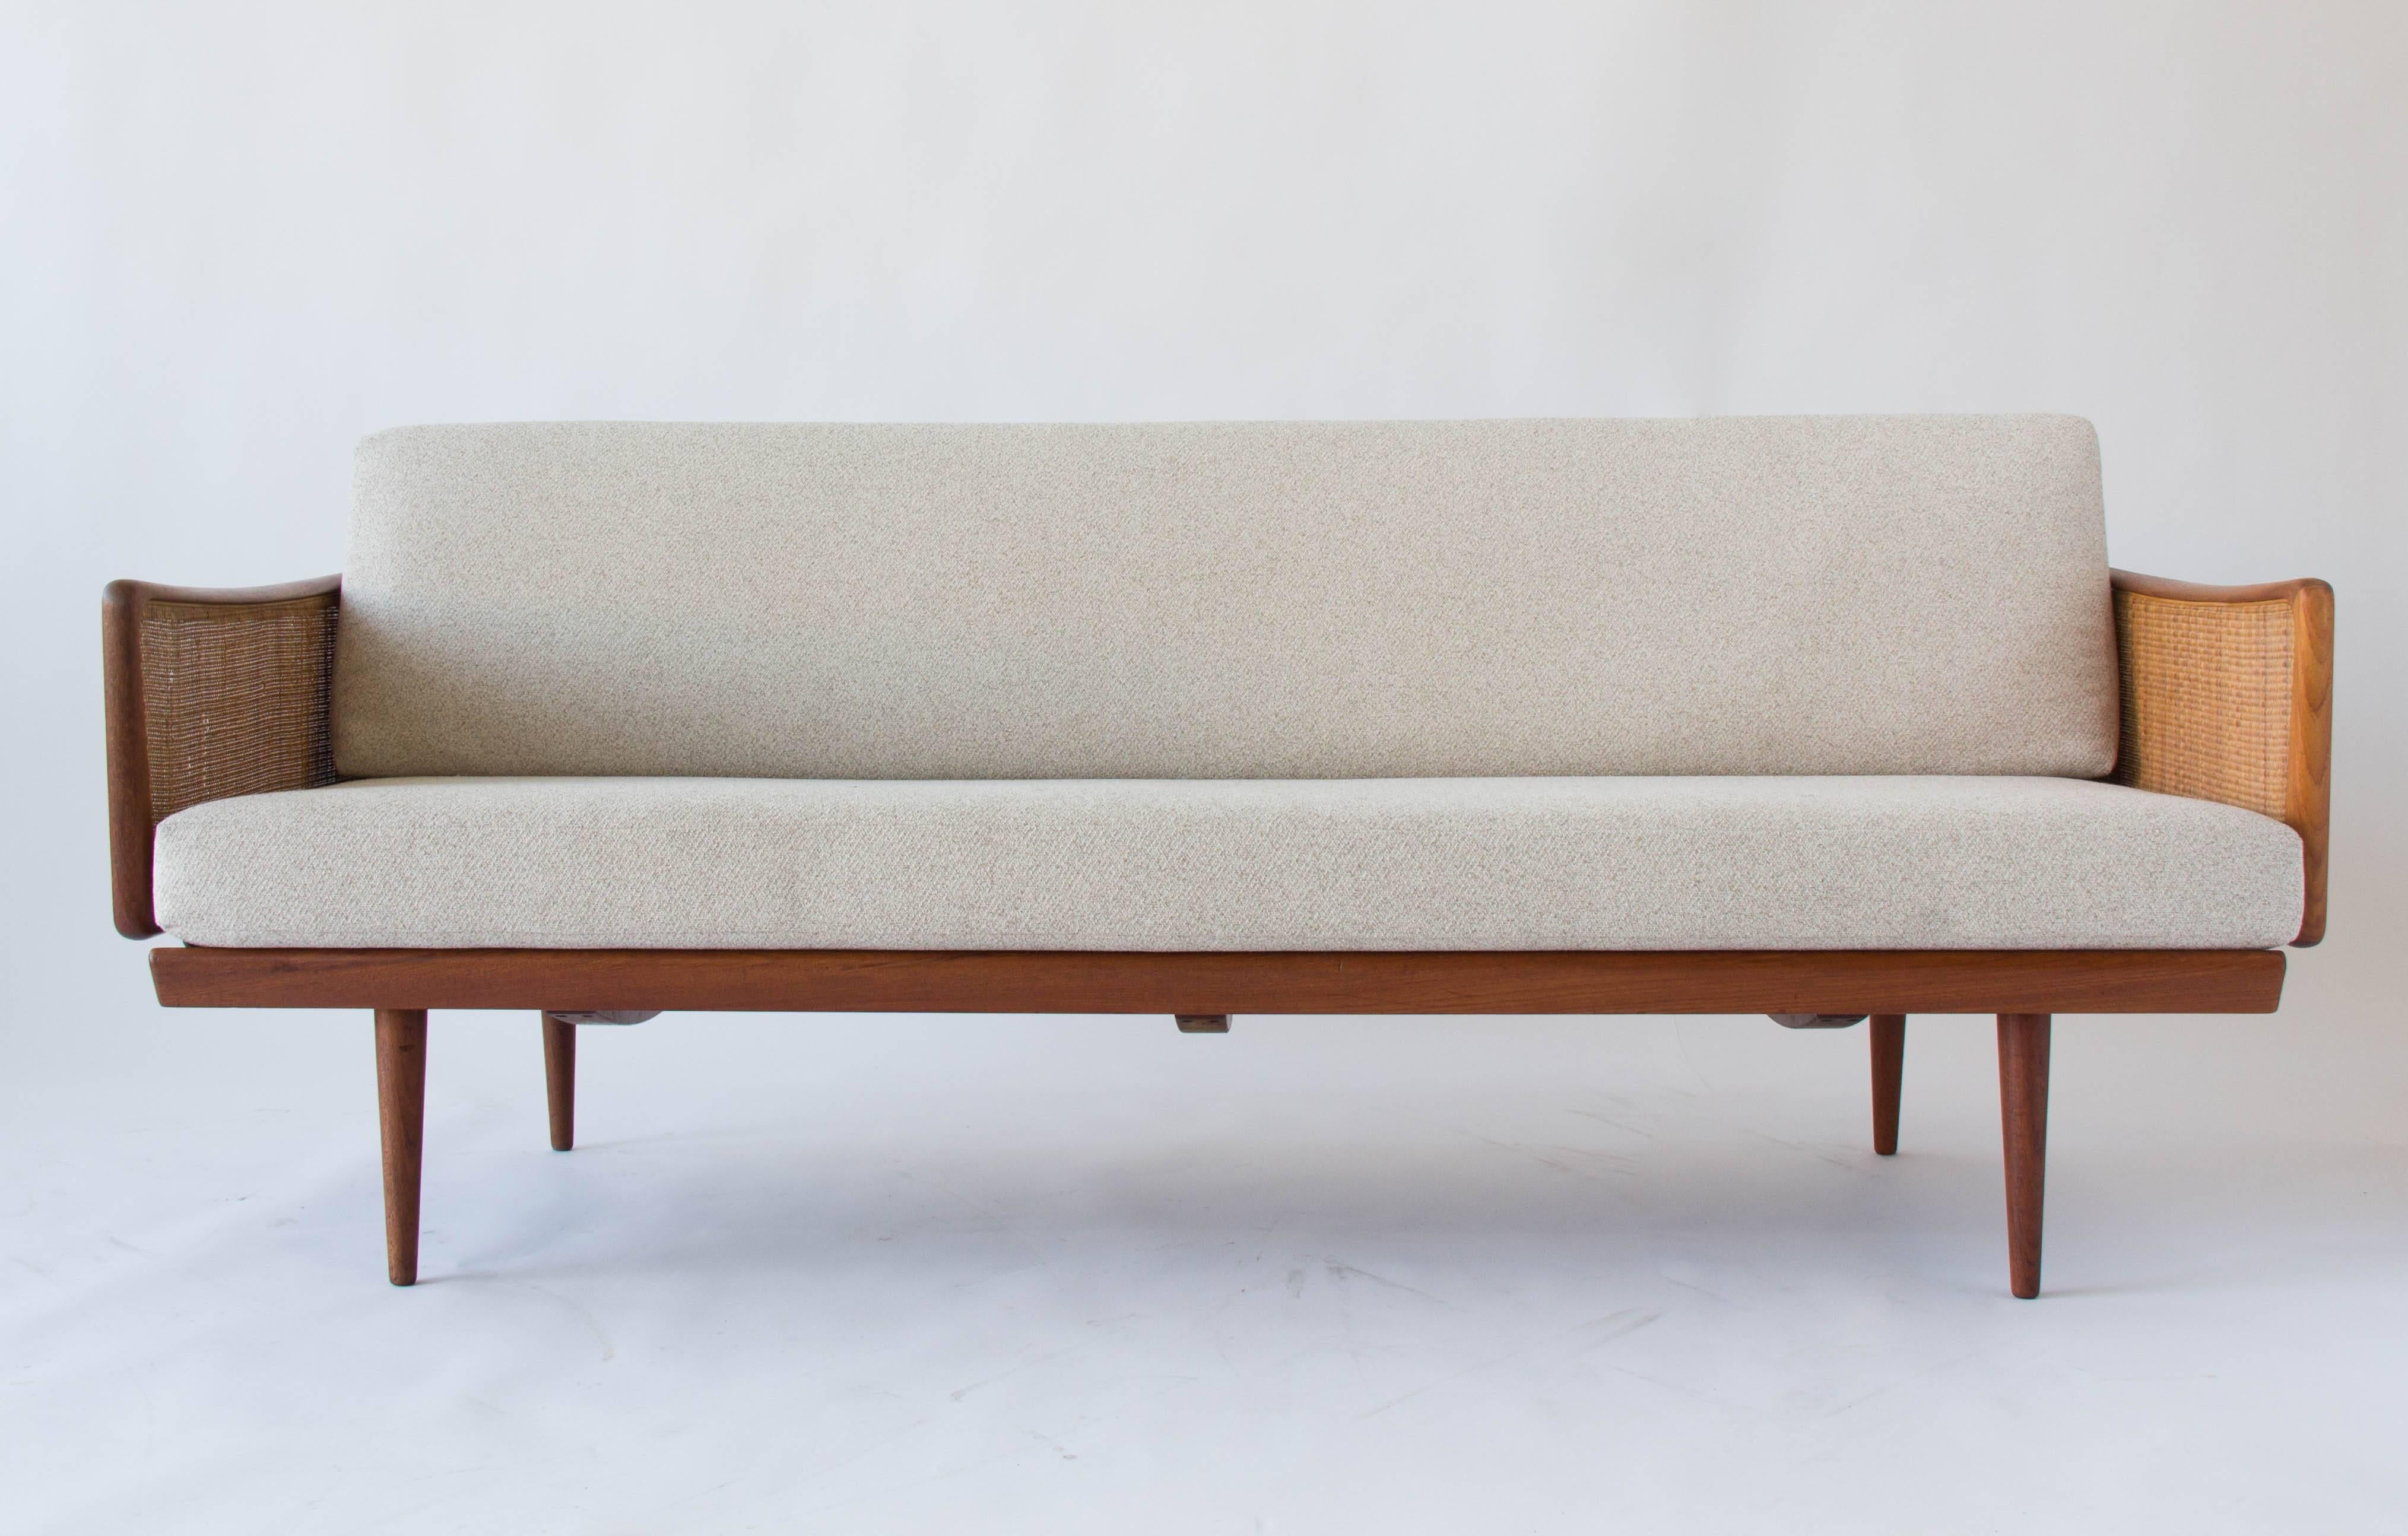 A modestly-sized sofa designed by Peter Hvidt and Orla Mølgaard-Nielsen for John Stuart of New York. The sofa was manufactured in Denmark by France and Daverkosen. The teak frame is fitted with panels of woven cane at the back- and arm-rests, and